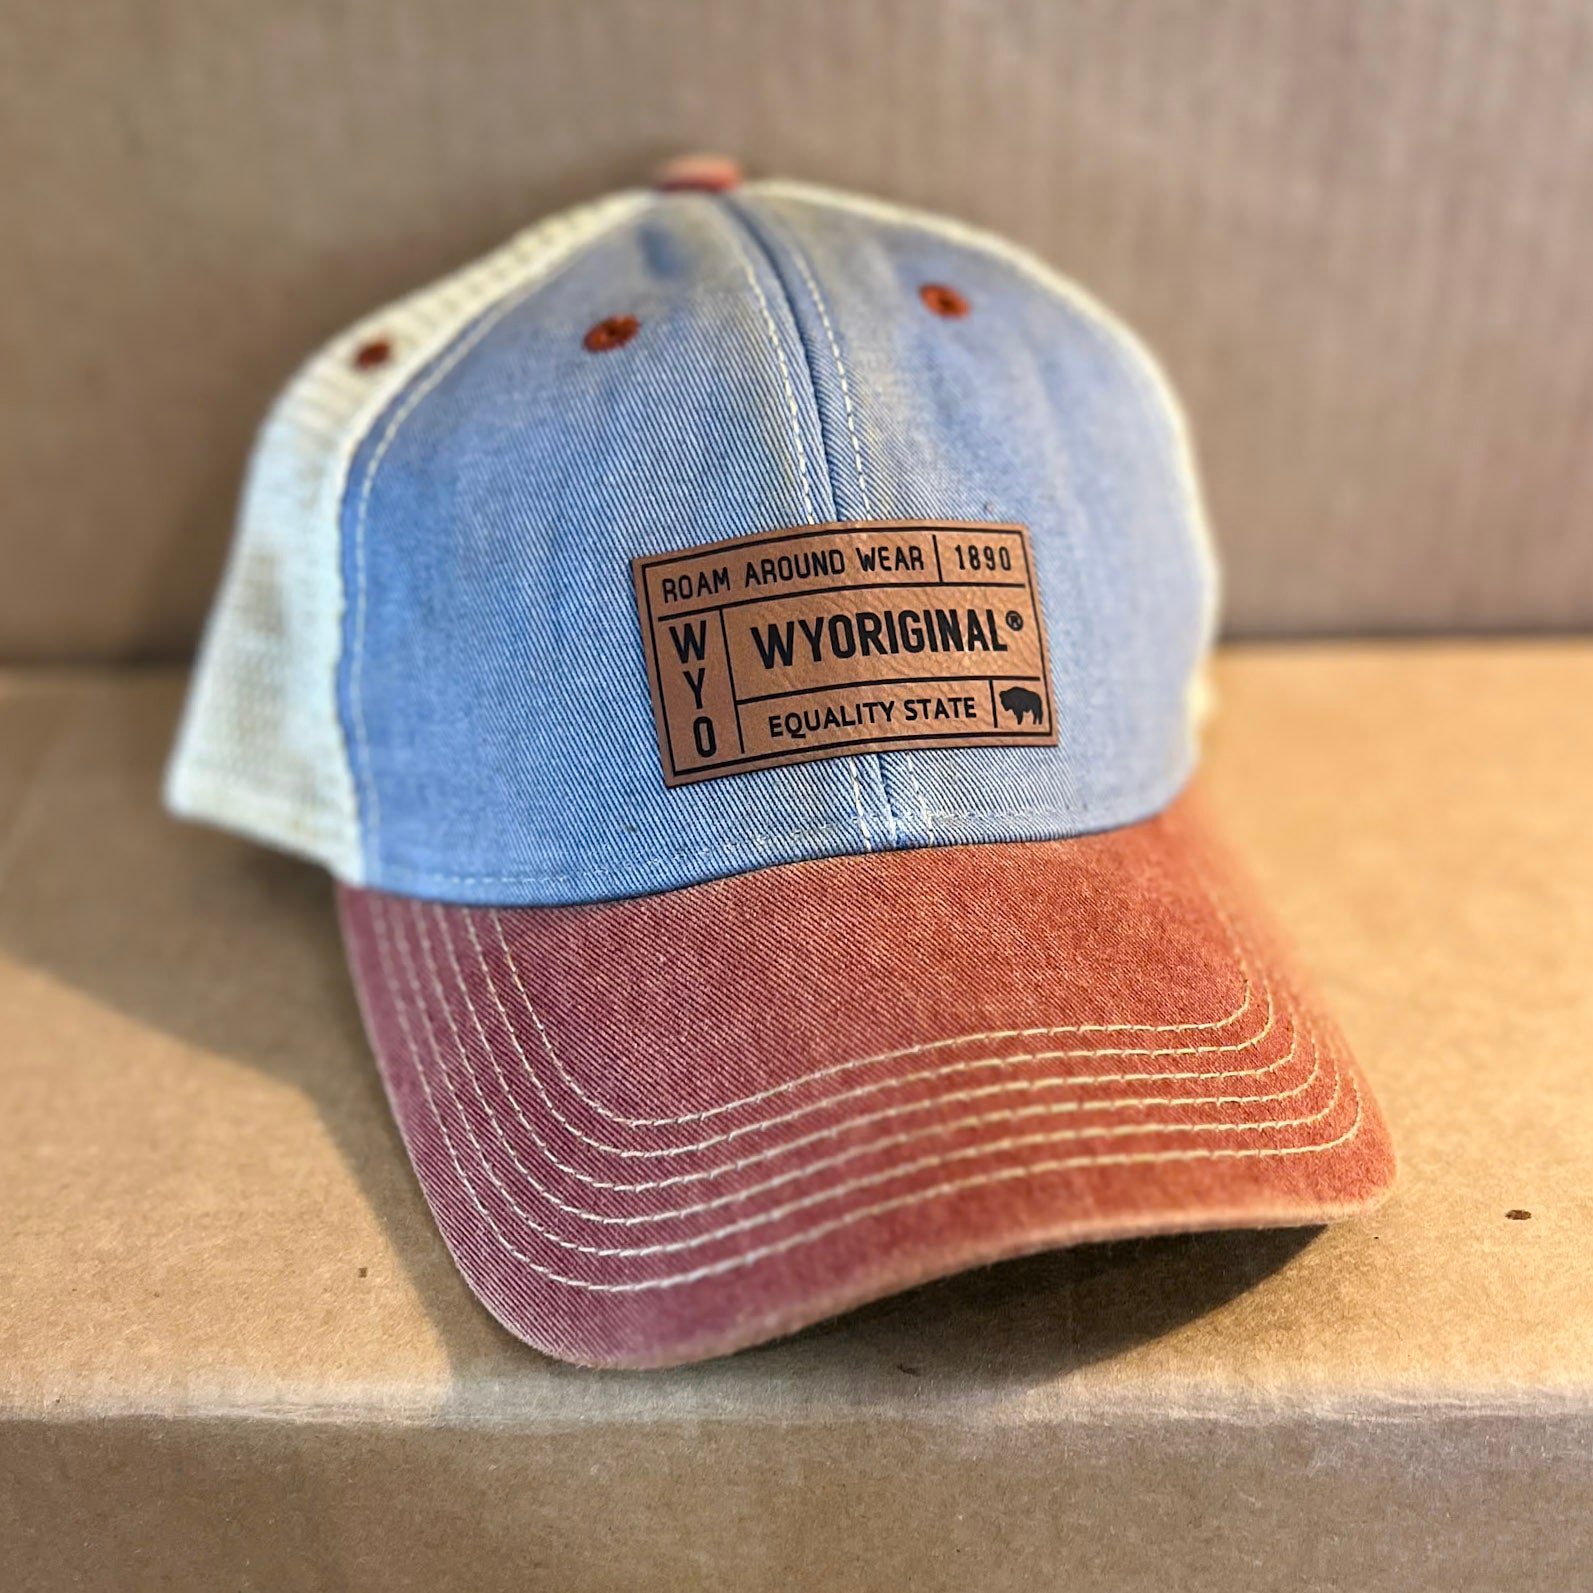 WYORIGINAL leather patch hat on tri-color dad hat. Legacy fit. Old favorite hat. Roam Around Wear is a Wyoming t-shirt company based out of Gillette, Wyoming